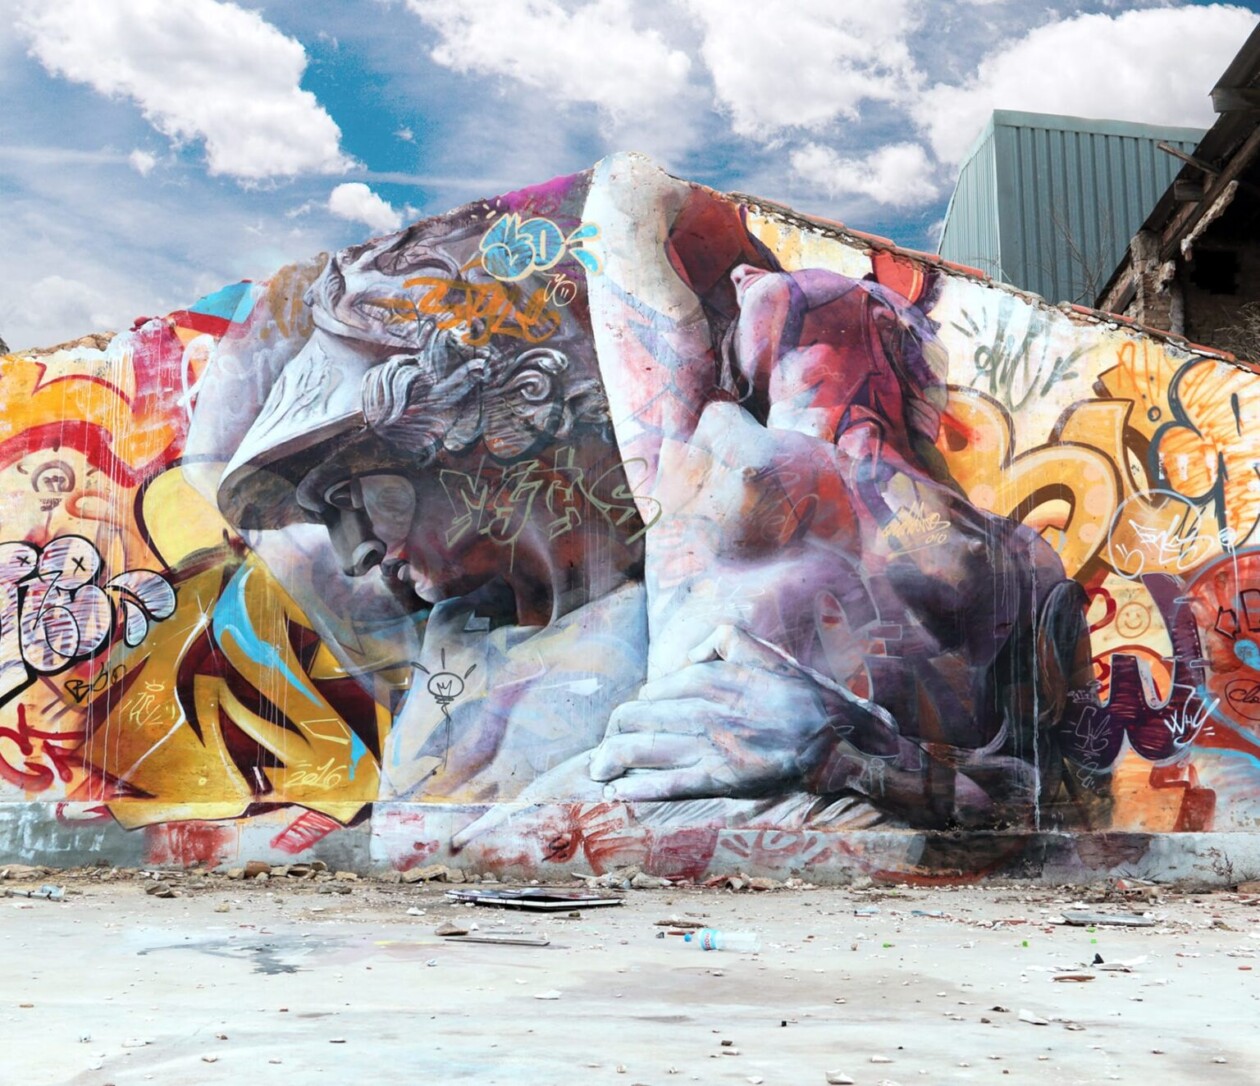 Impressive Monumental Murals That Blend Classical Figures And Graffiti By Pichiavo (5)